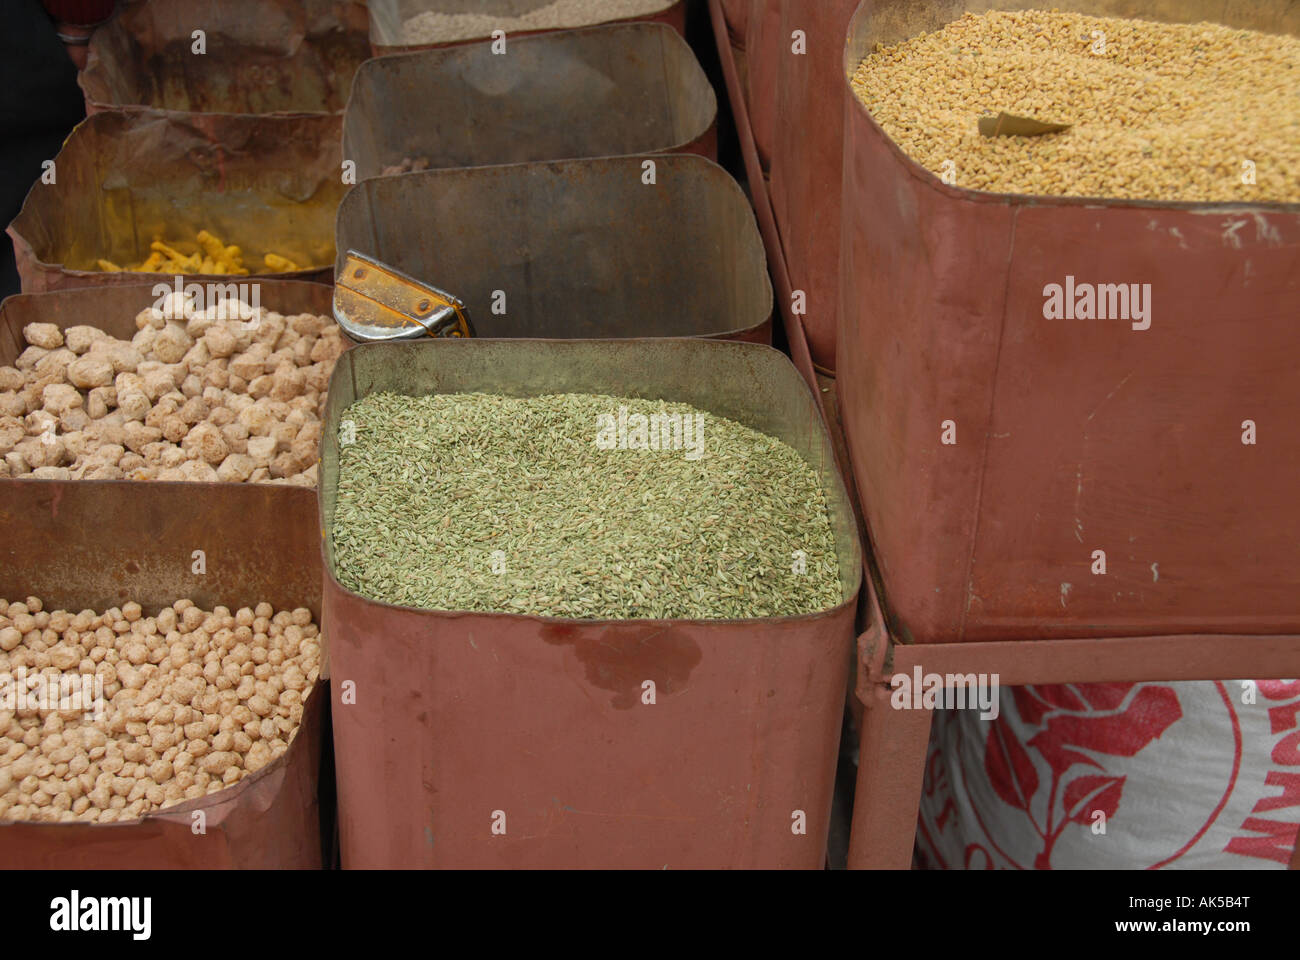 Anise seed and fenugreek among other spices in metal tubs at the Shimla bazaar. Stock Photo